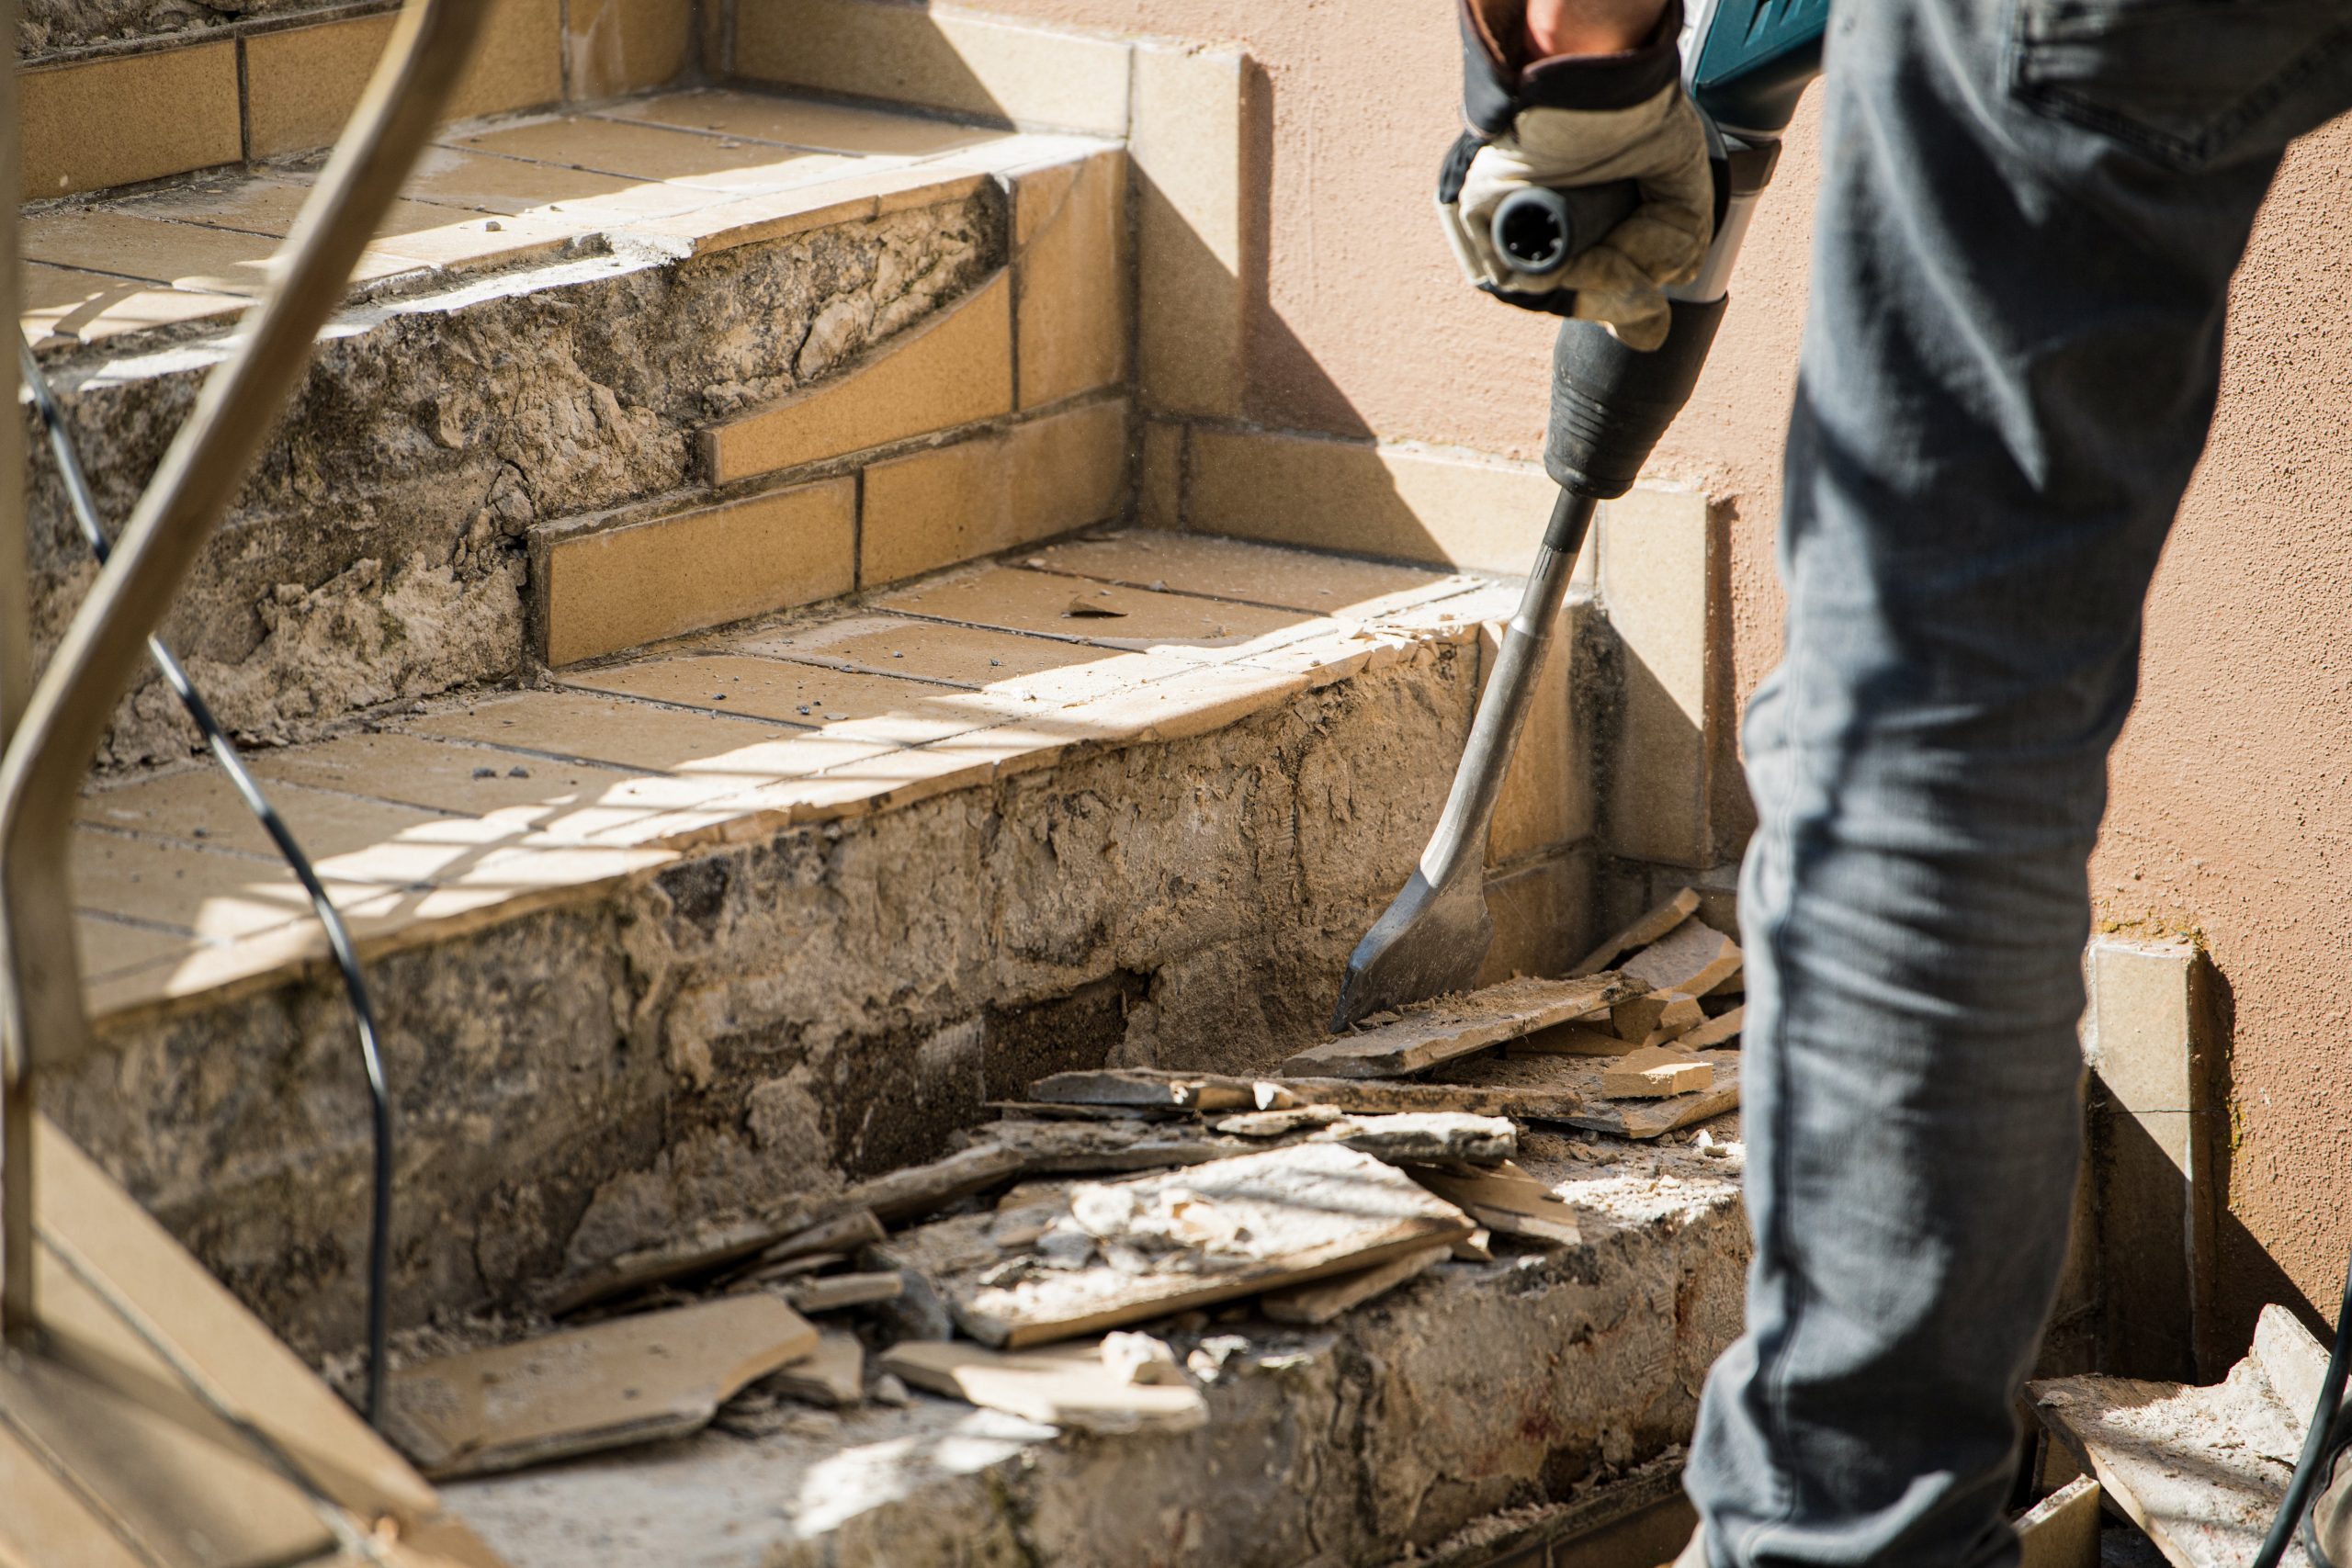 Can concrete demolition be done in a residential area? faq - The Junk Guys